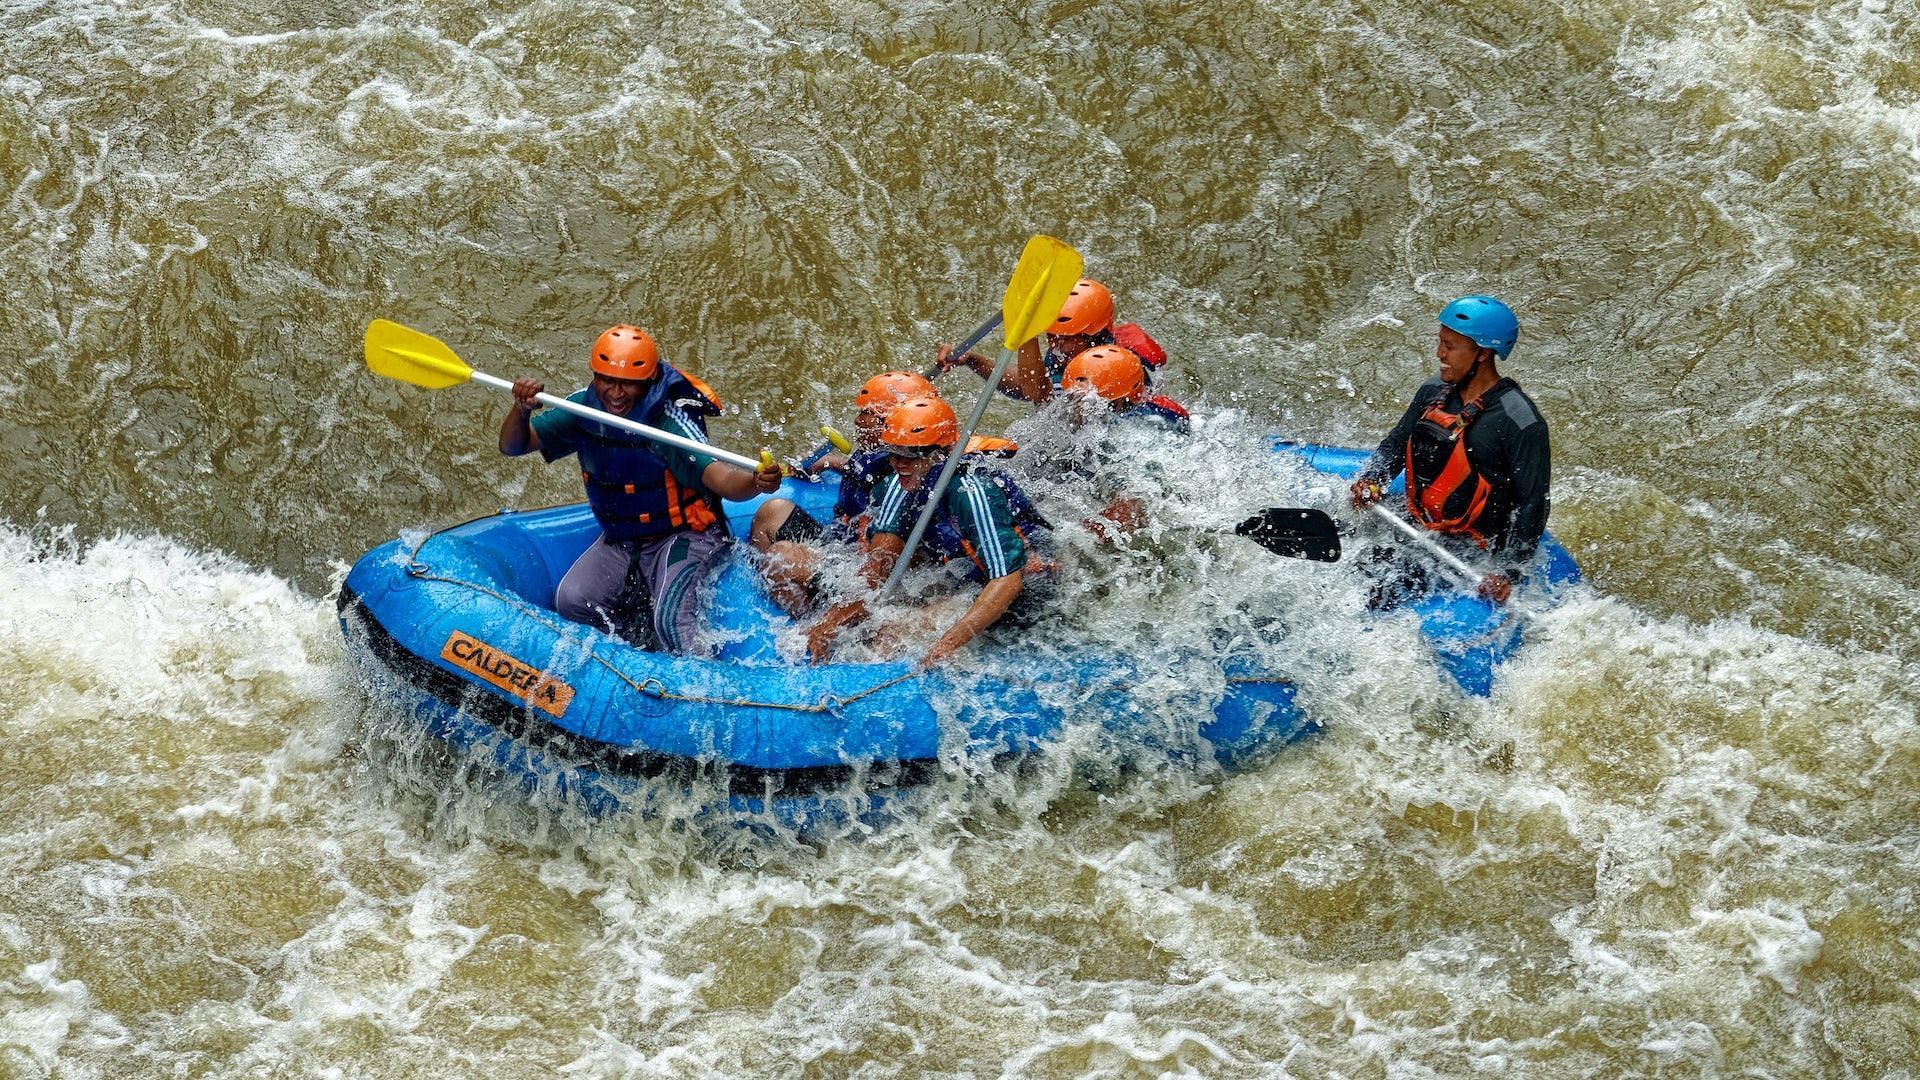 How to prepare yourself for rafting. Image via Pexels/Tom Fisk